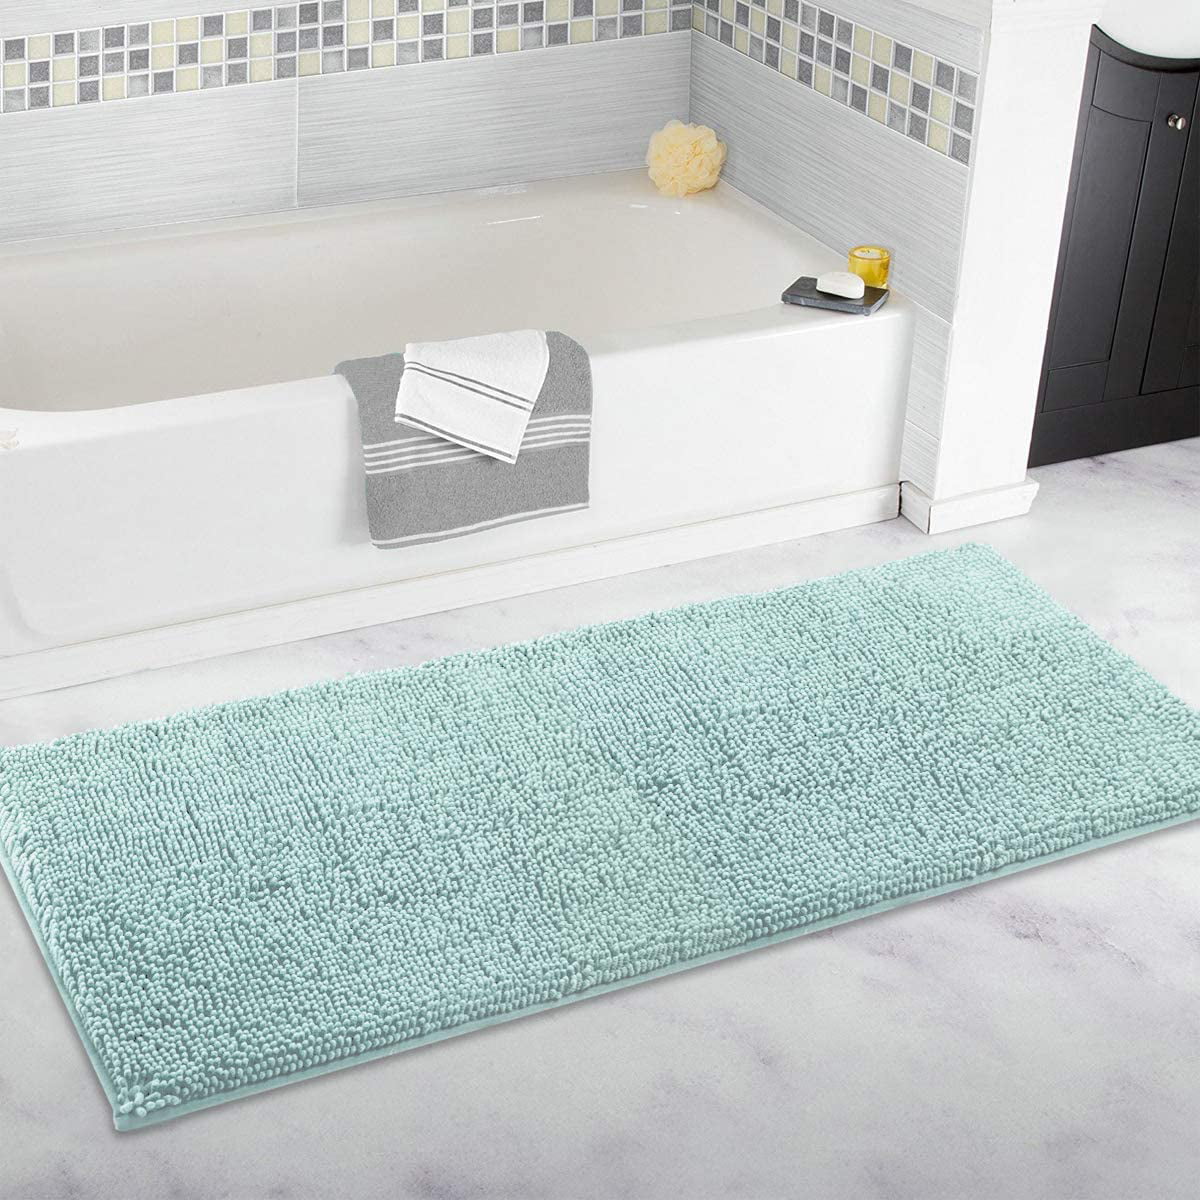 ITSOFT Non Slip Shaggy Chenille Soft Microfibers Bath Mat for Bathroom Rug Water Absorbent Carpet 34 x 21 Inches Spa Blue 